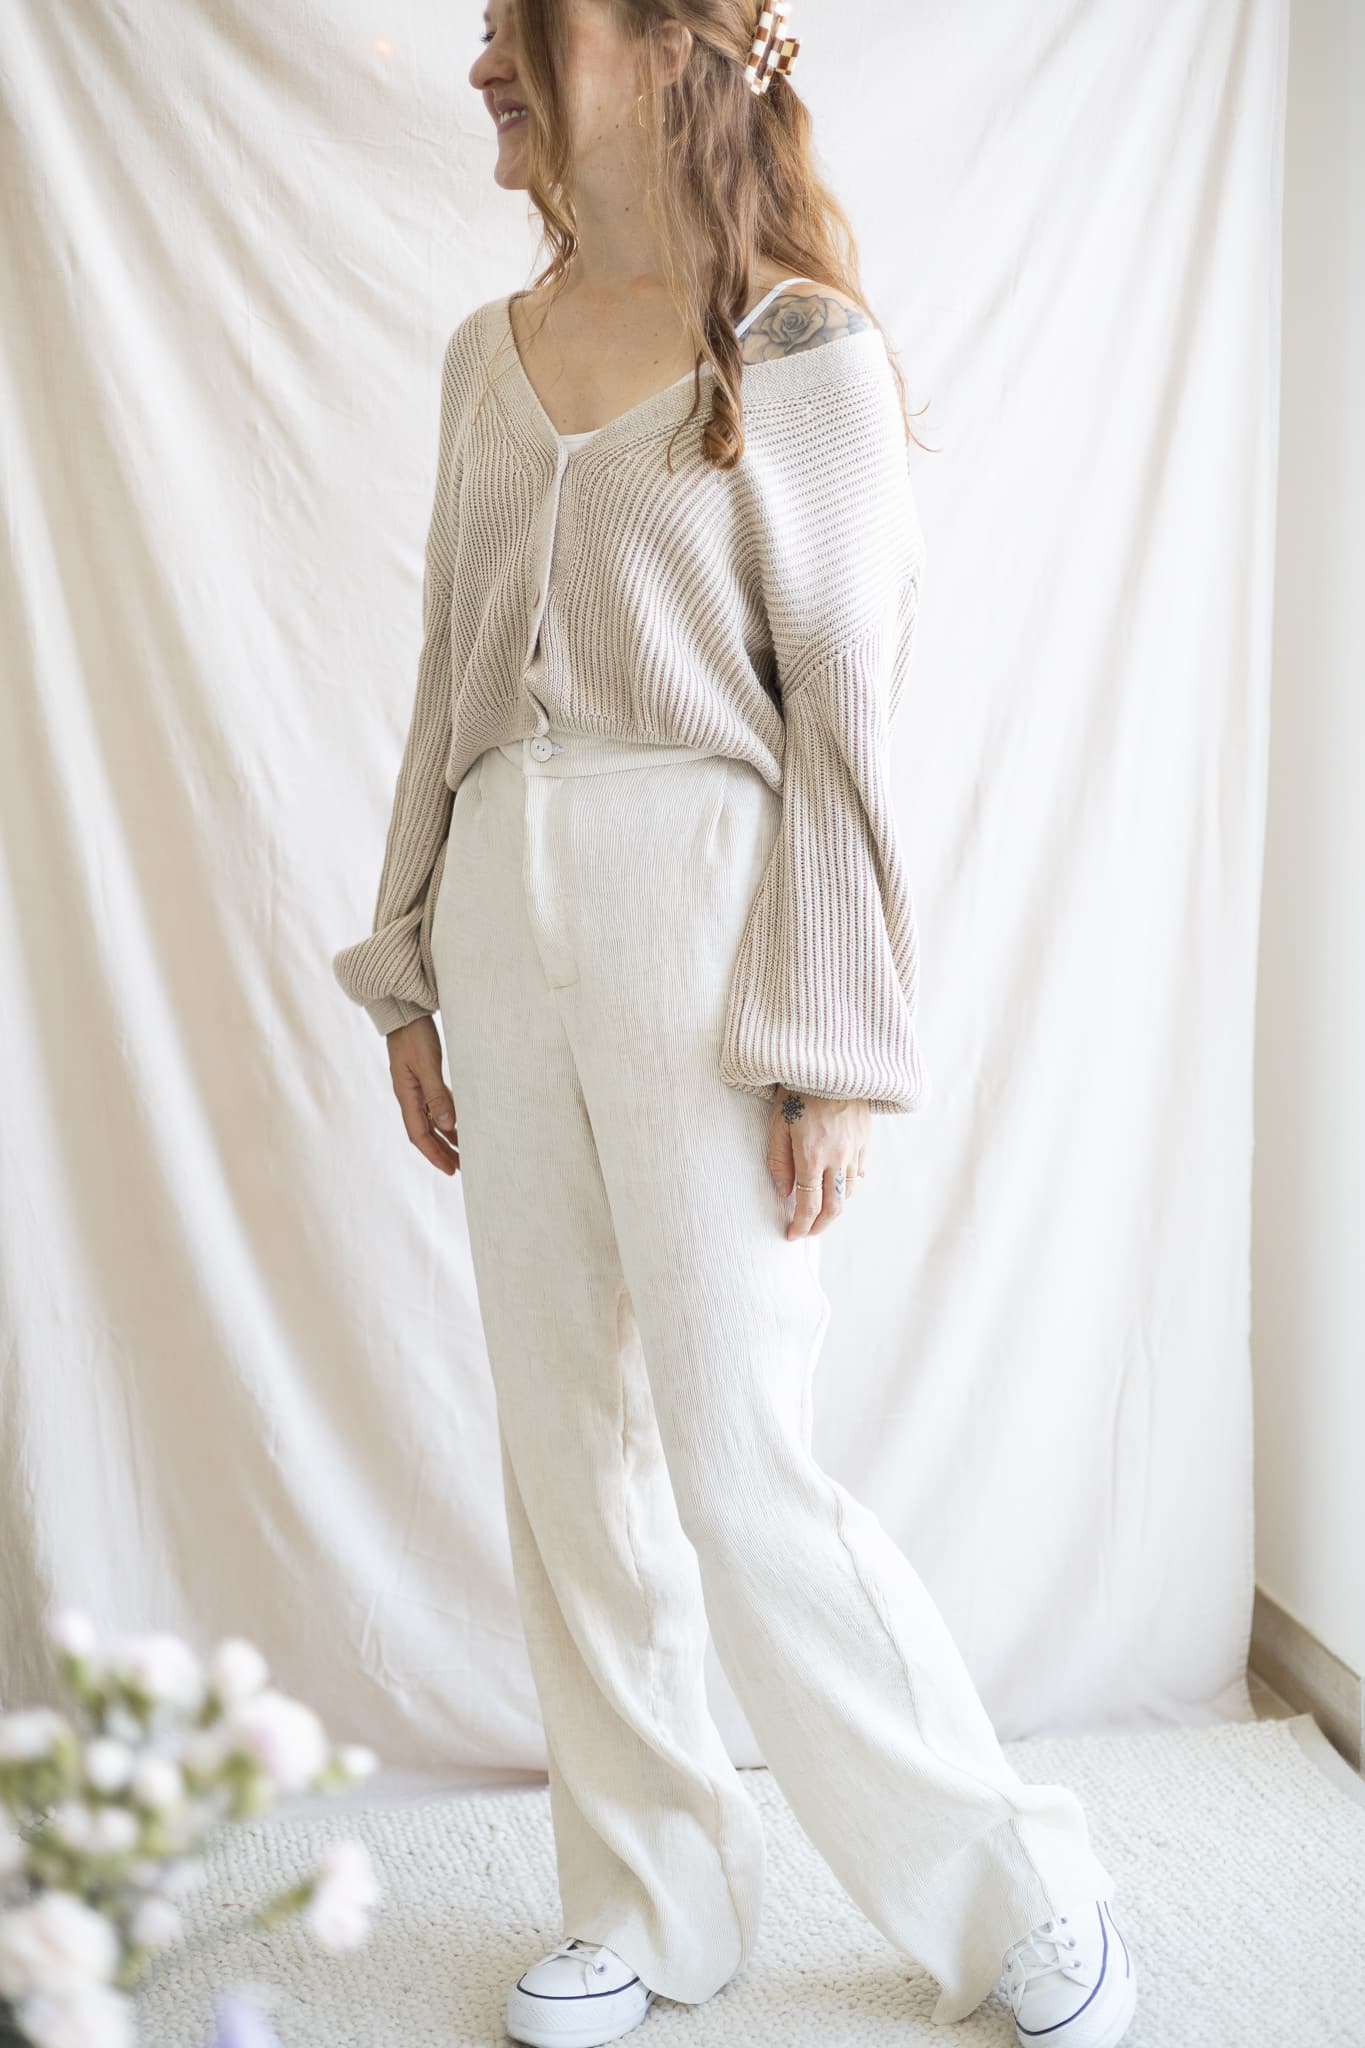 Five Must-Have Trouser Sewing Patterns - Sew Over It